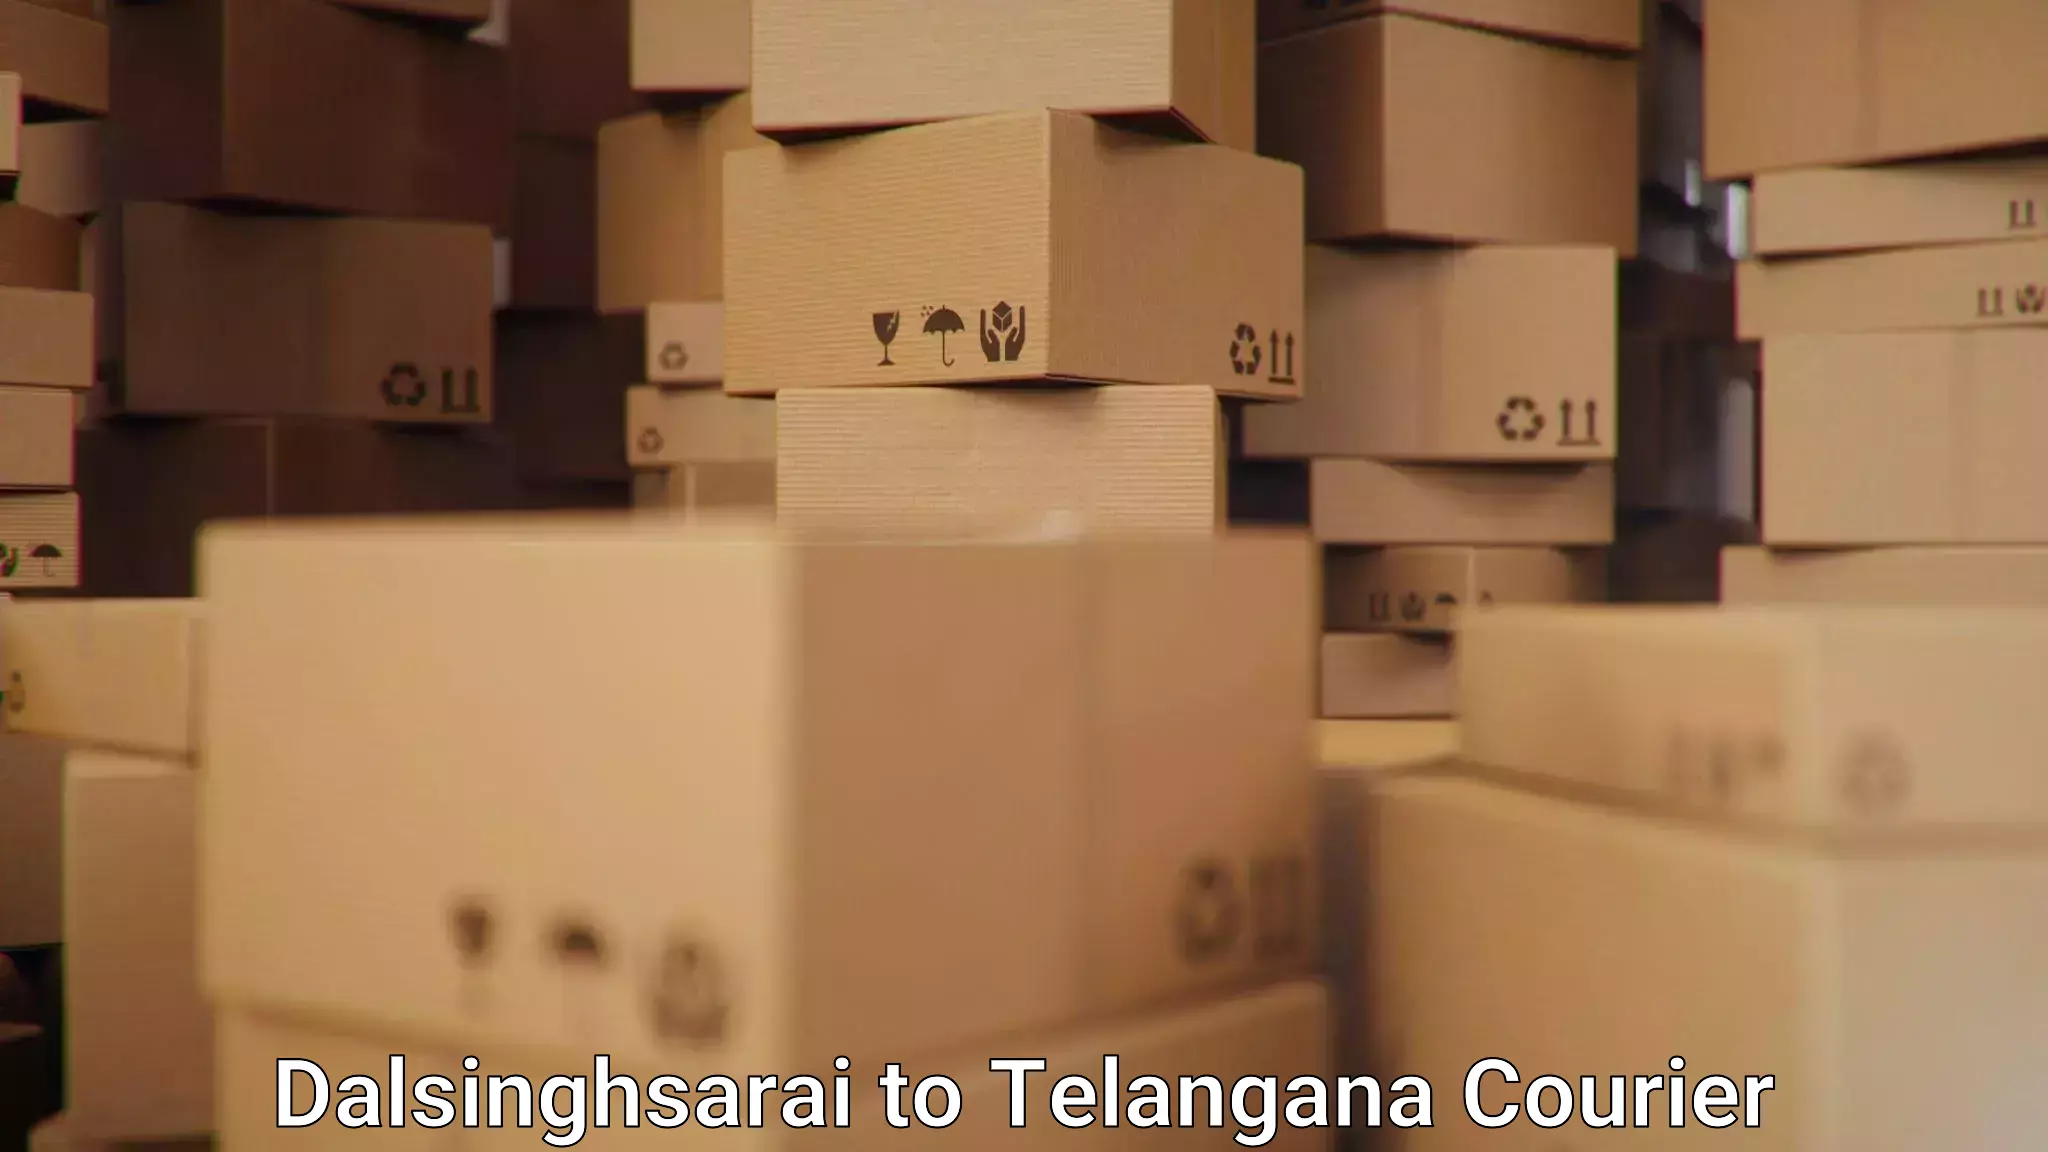 State-of-the-art courier technology Dalsinghsarai to Mahadevpur